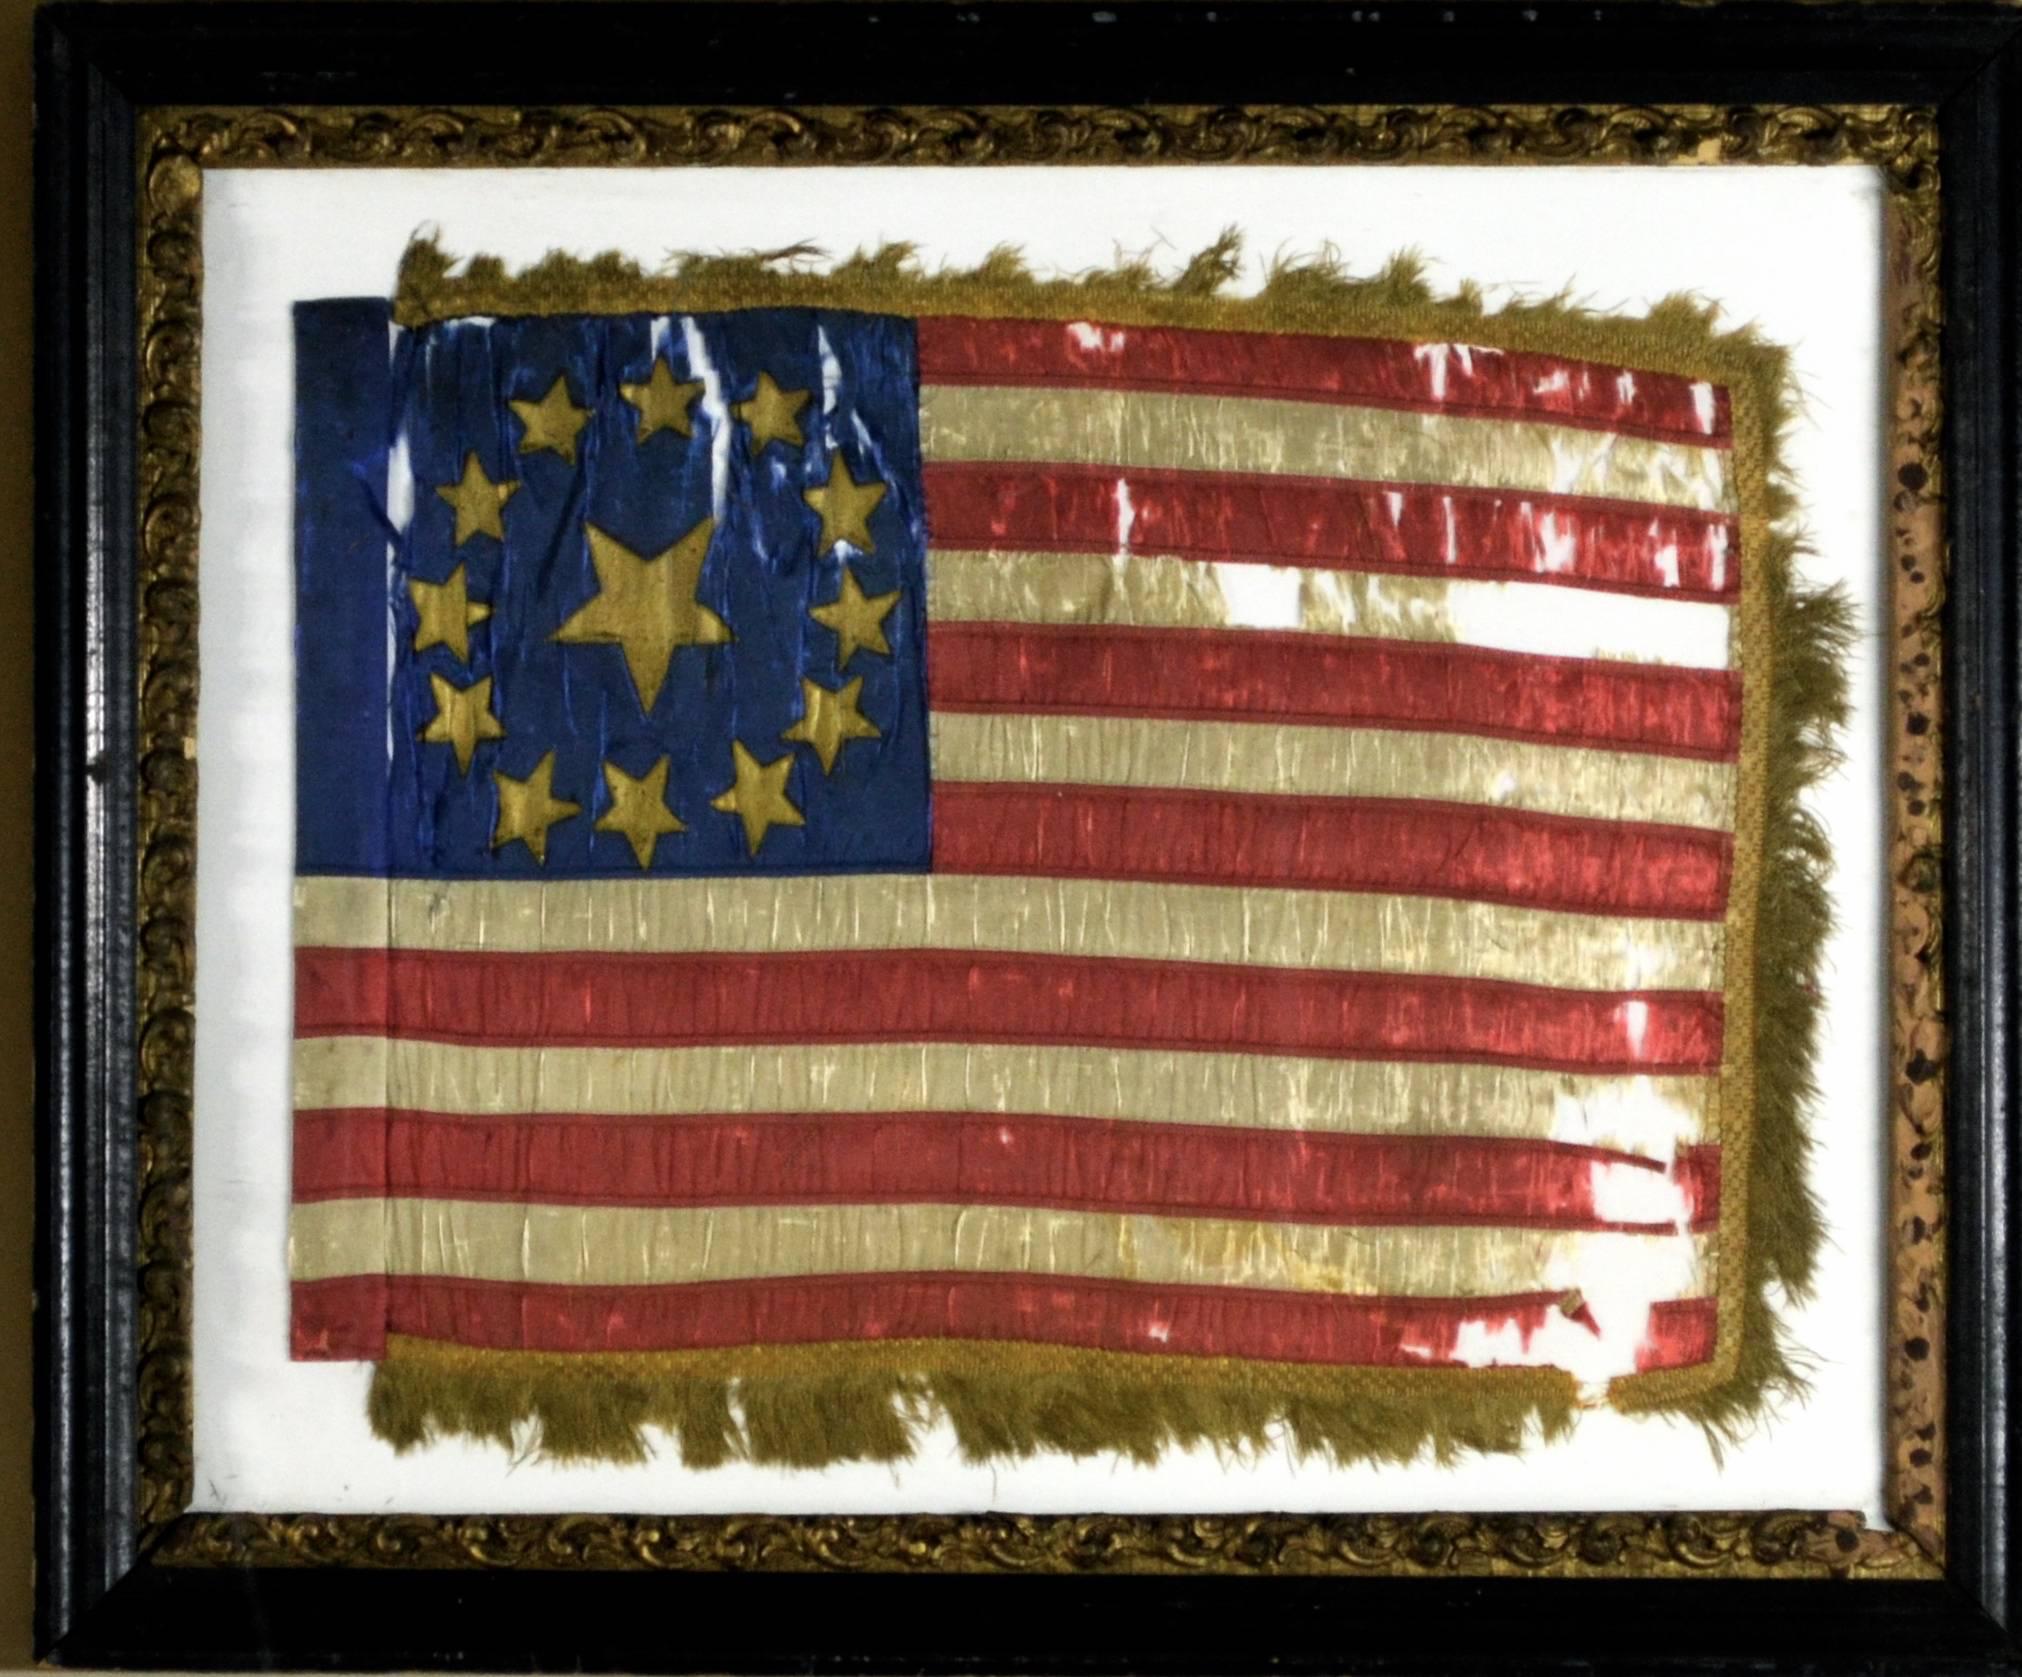 how many stars were on the american flag during the civil war